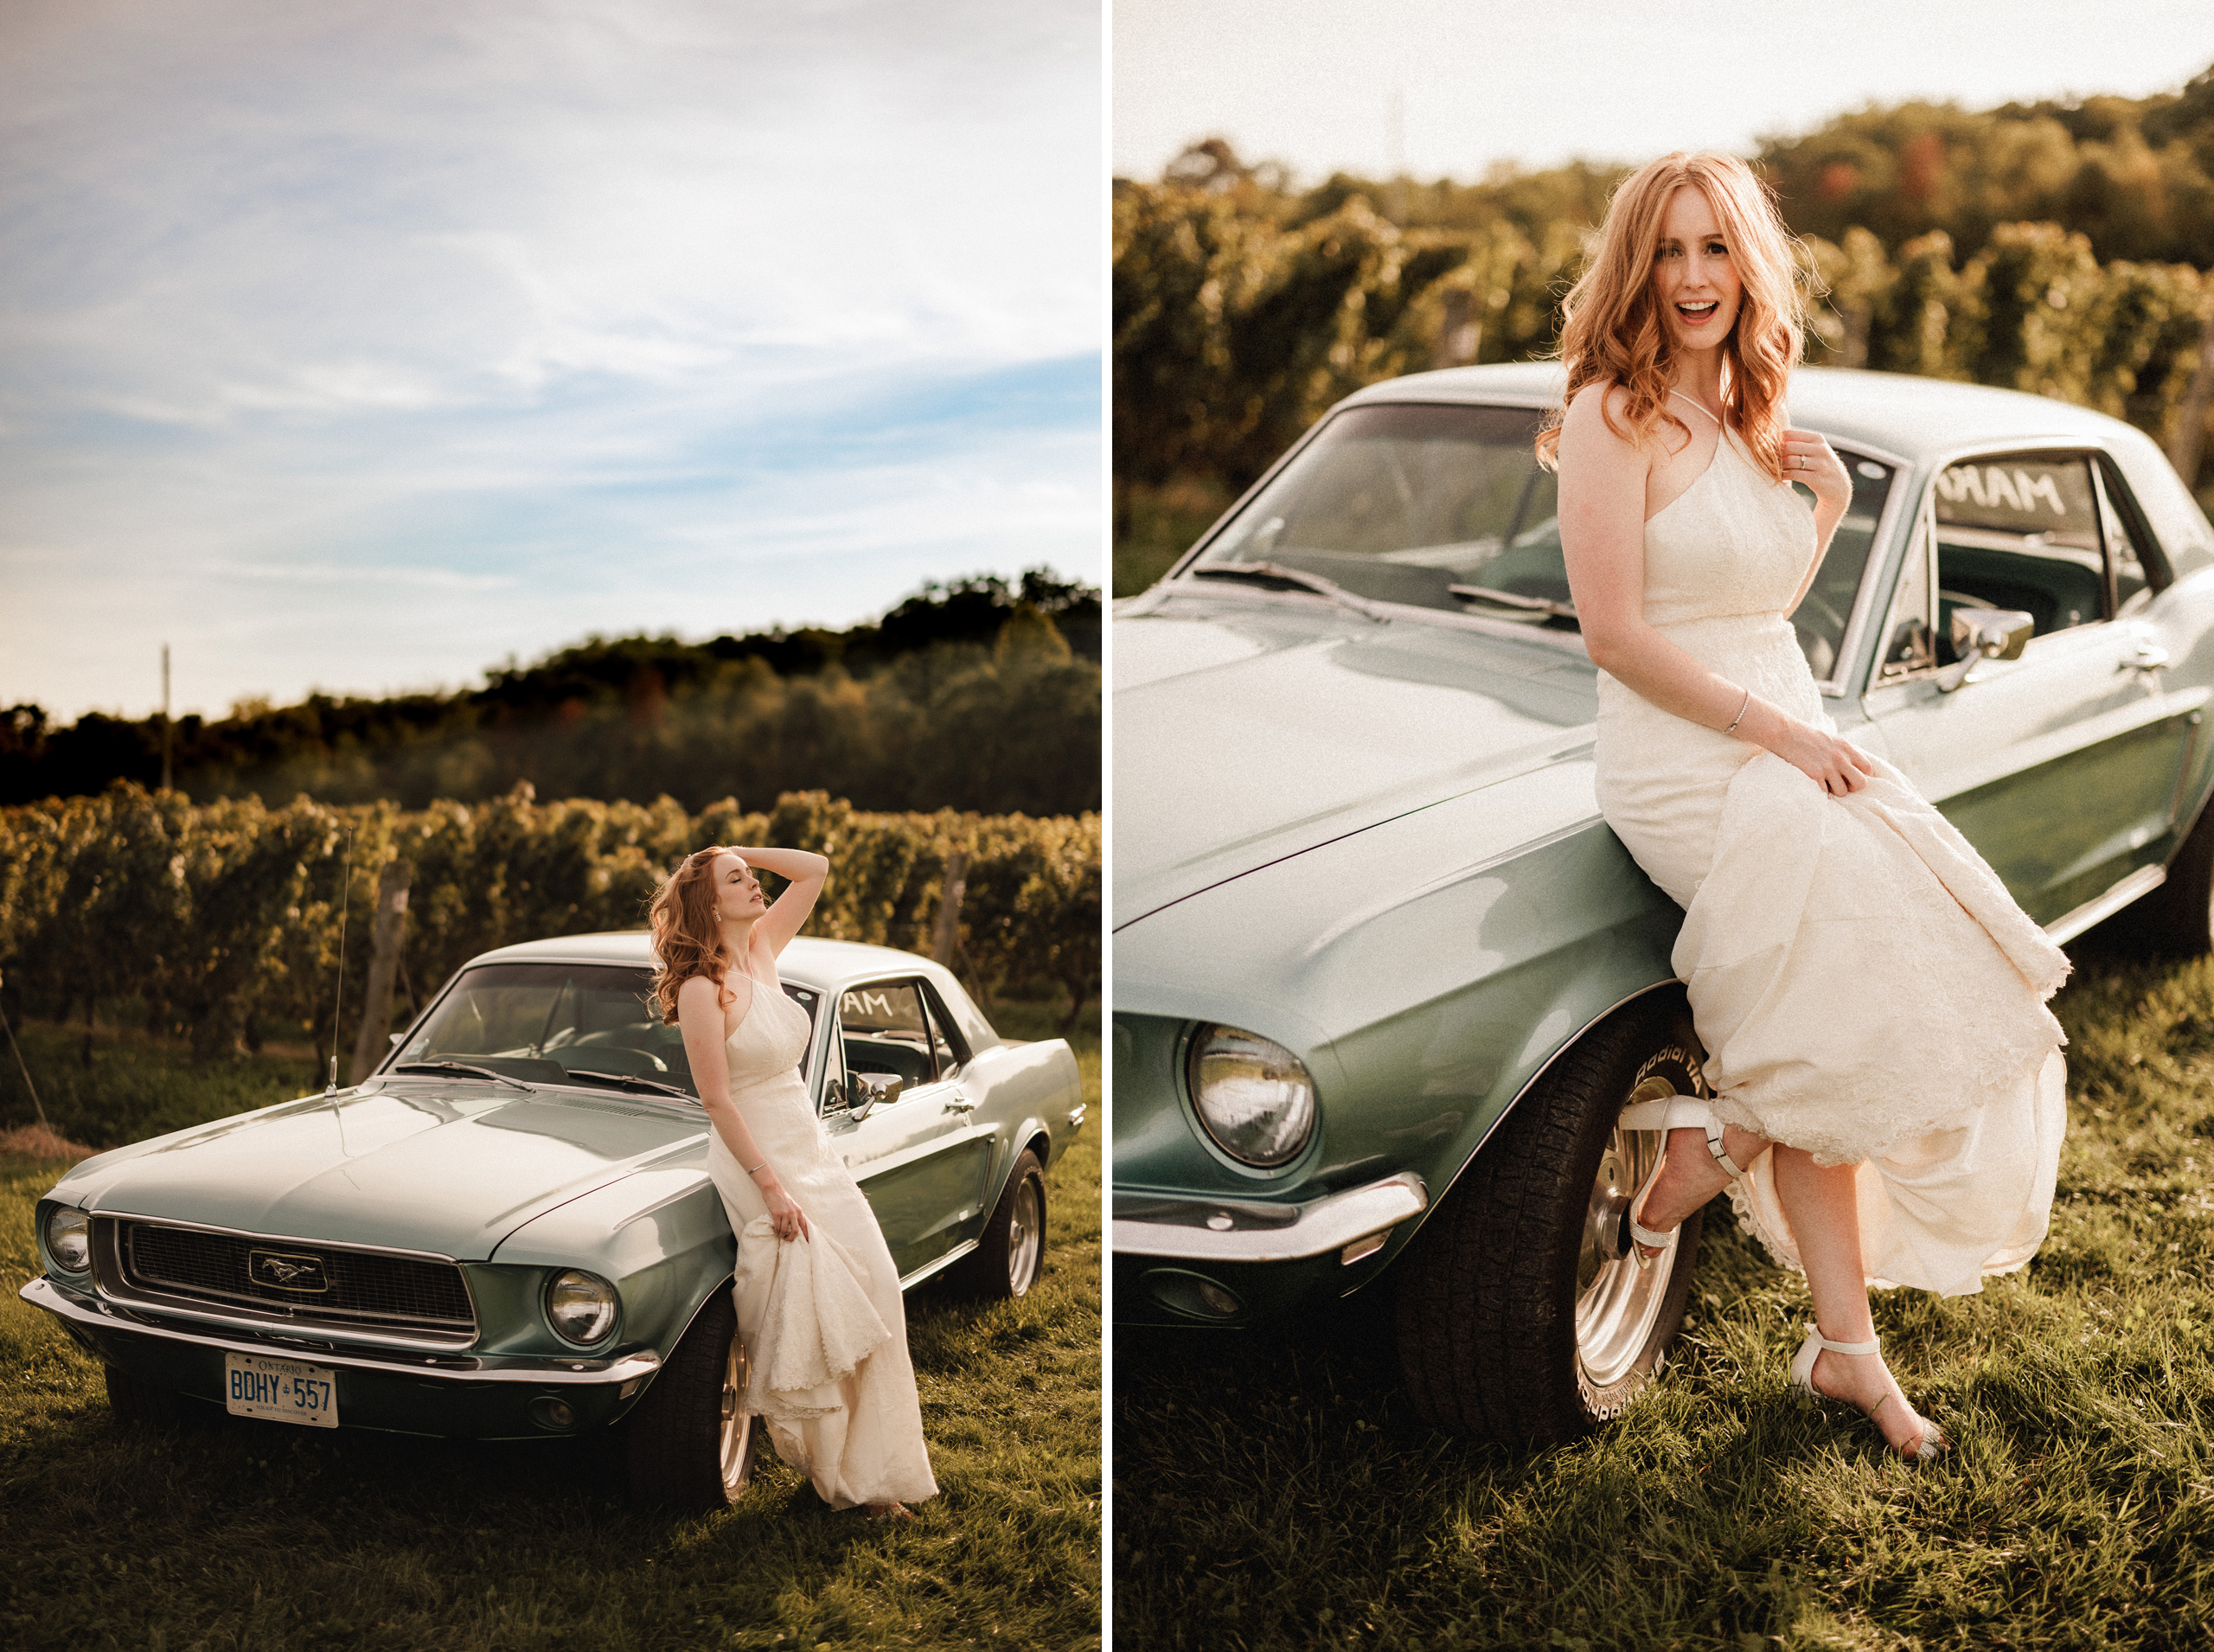 cave spring vineyard wedding autumn fall afterglow images classic car